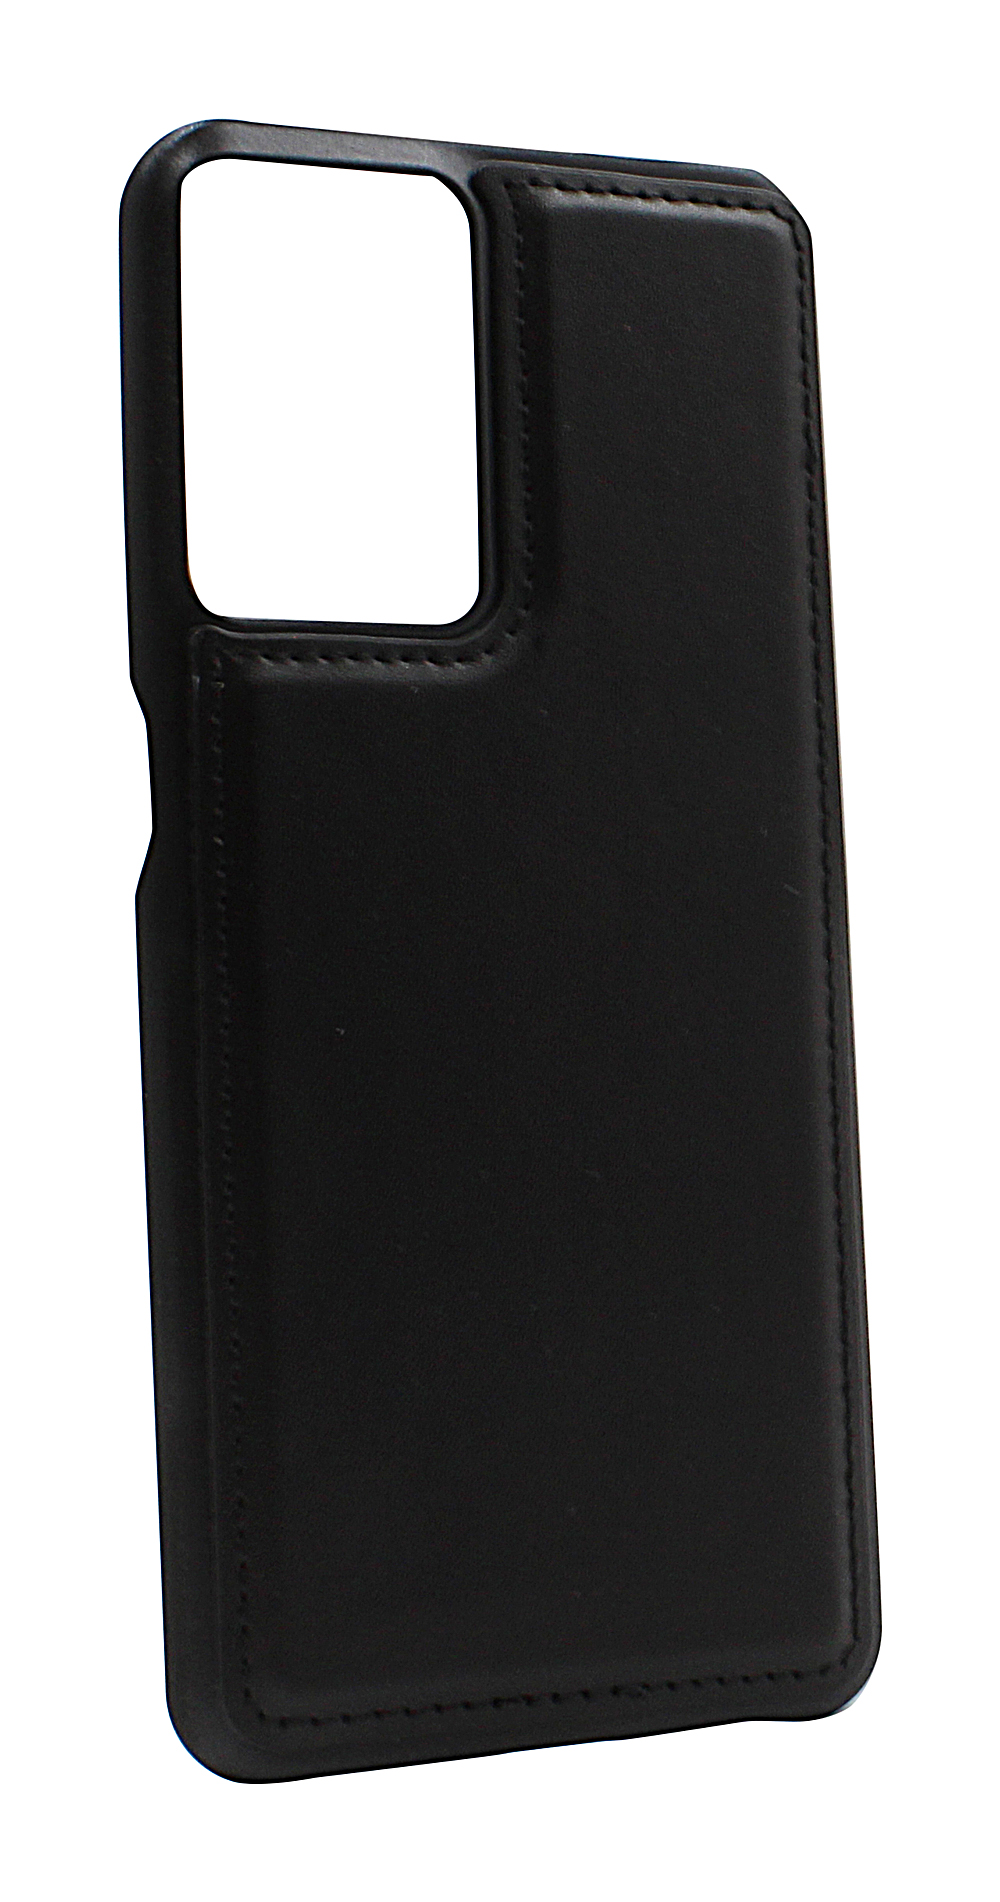 Magnet Cover OnePlus Nord CE 2 5G